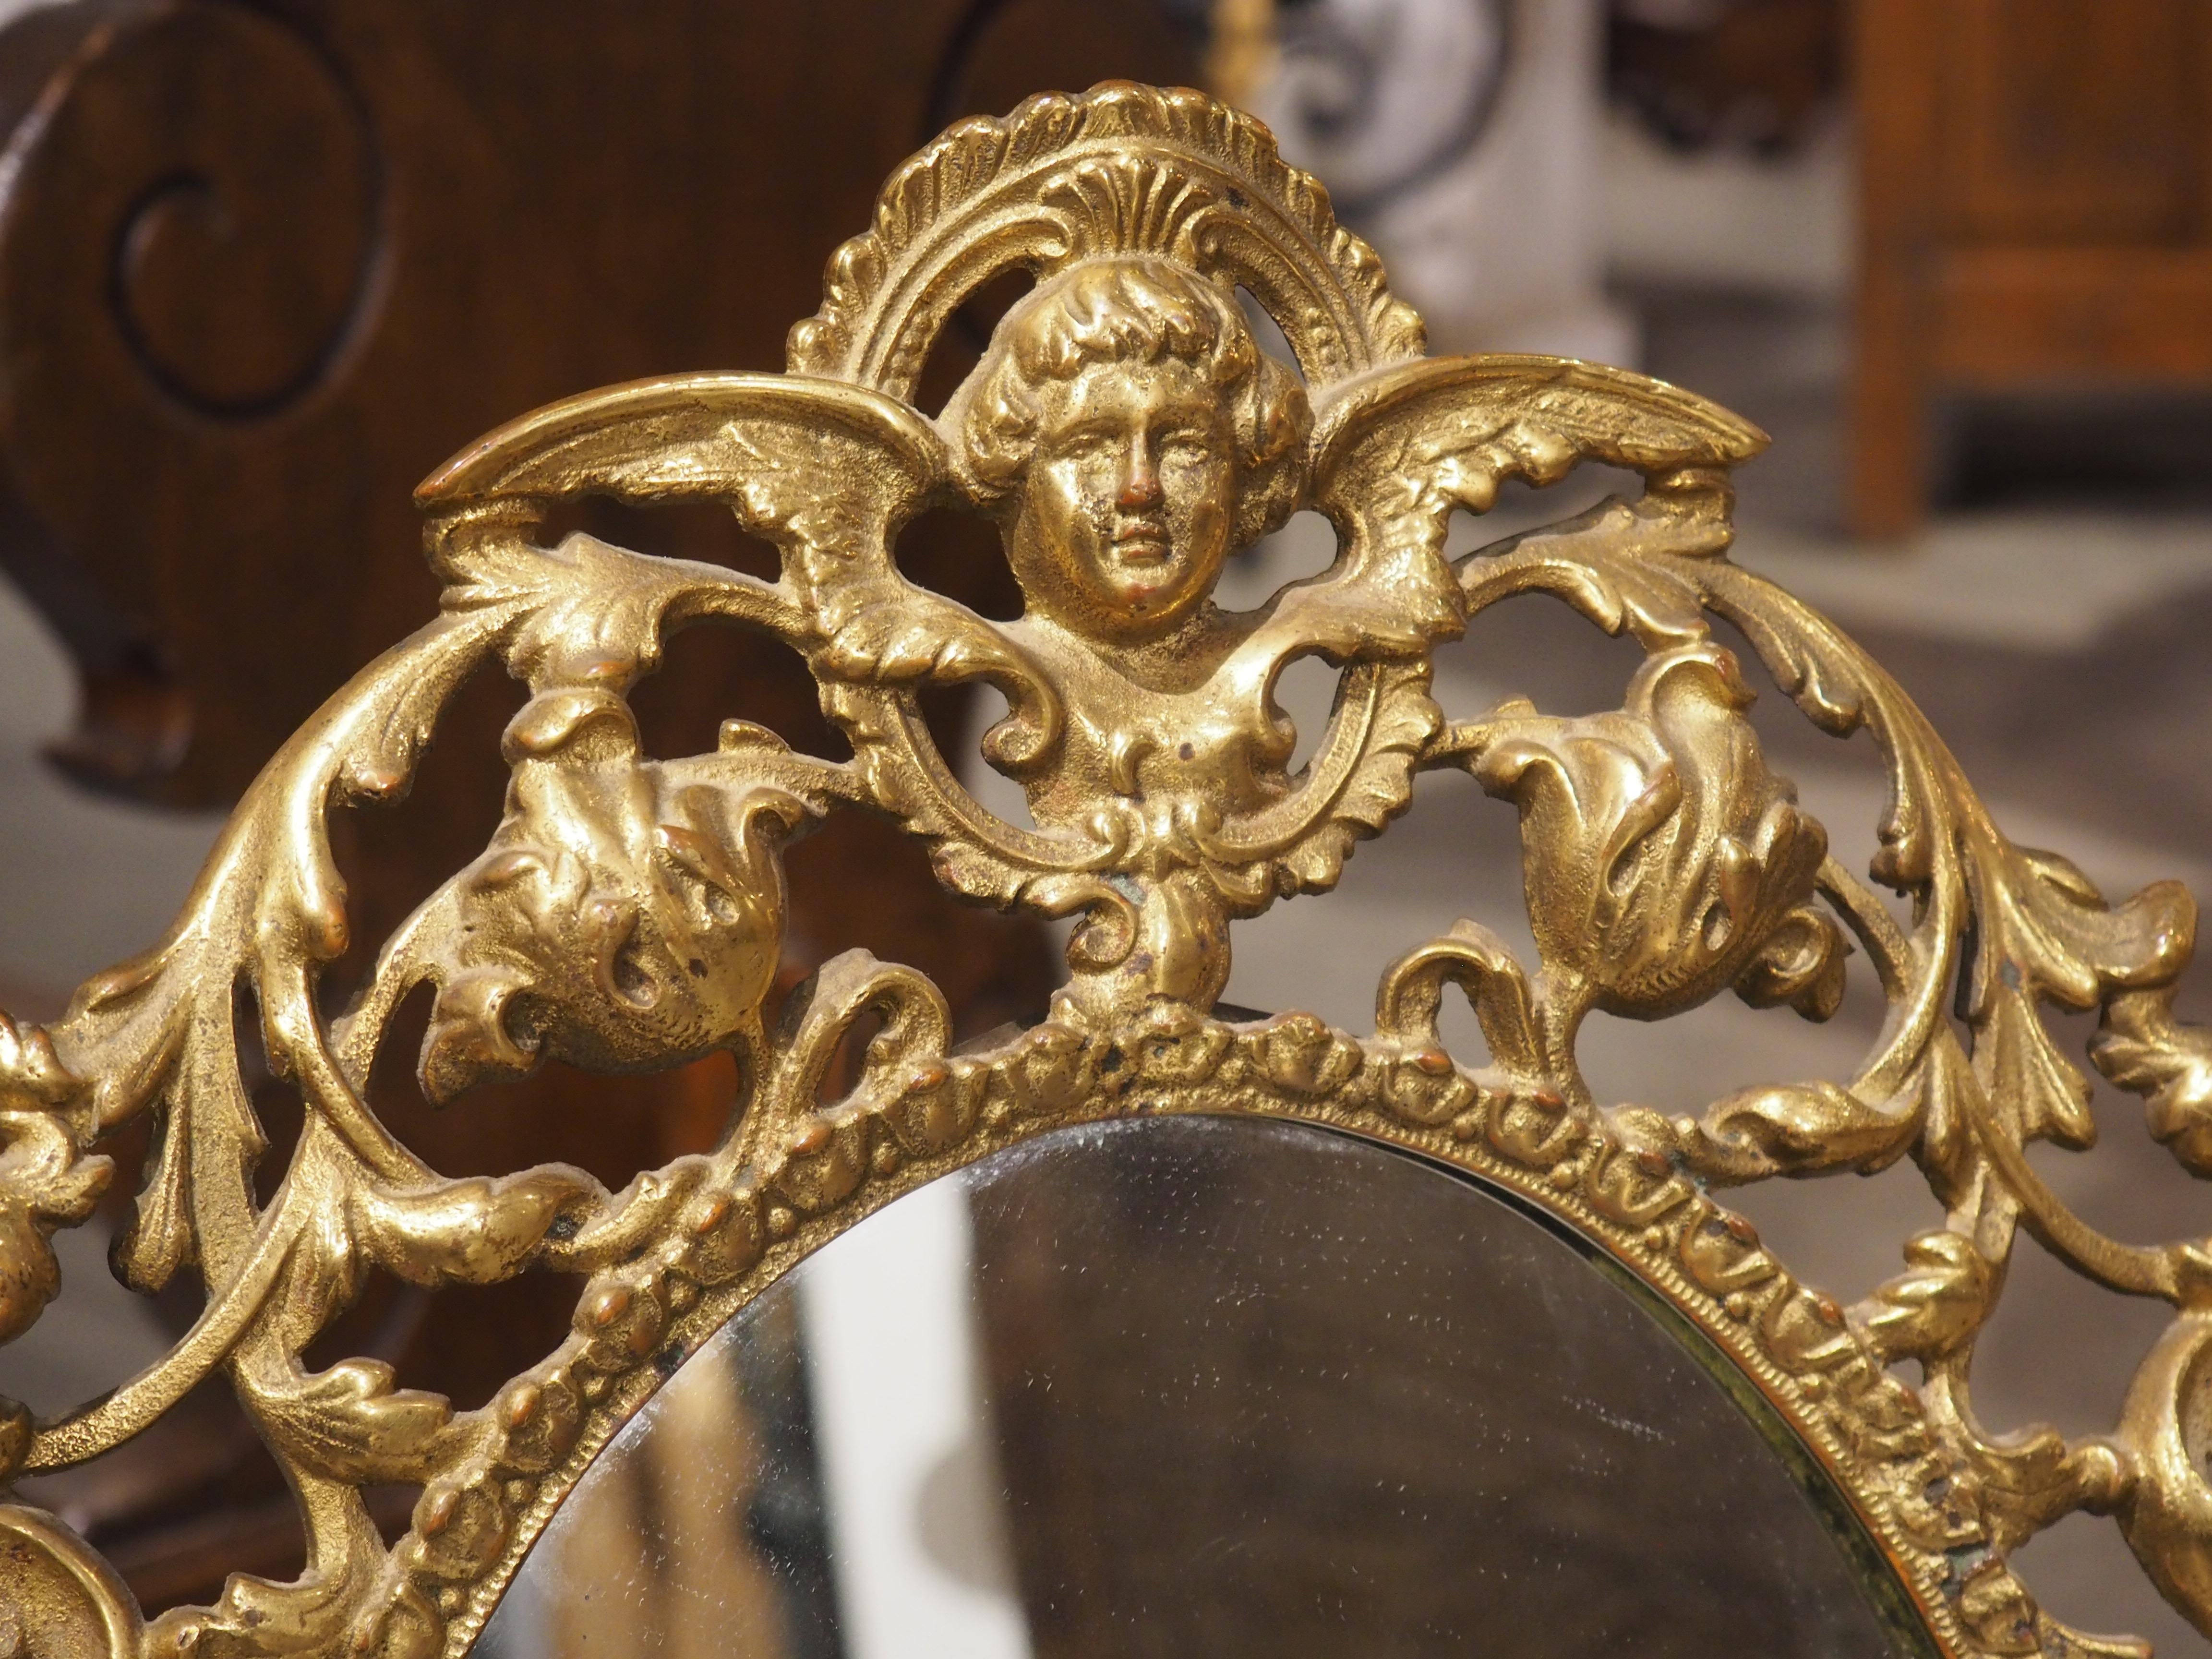 Circa 1900 Oval Gilt Bronze Table Mirror from Italy In Good Condition For Sale In Dallas, TX